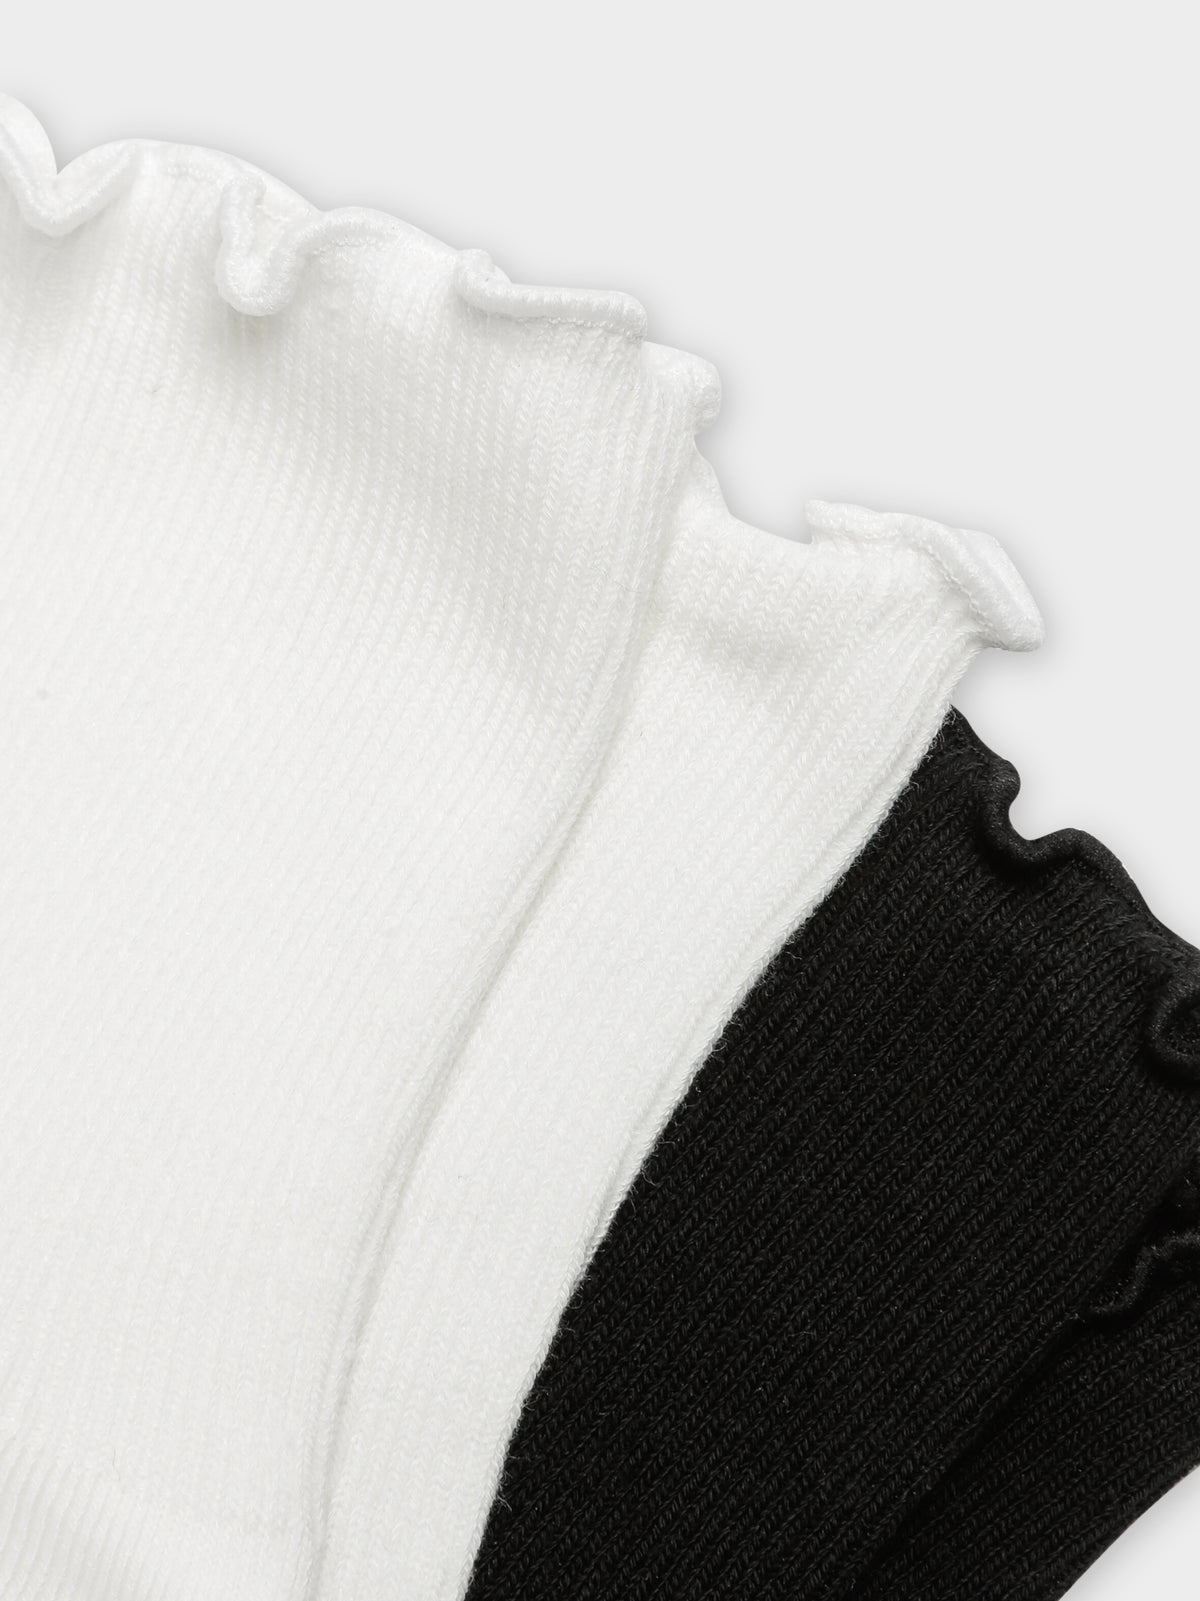 2 Pairs of Ruffle Ankle Socks in Black &amp; White